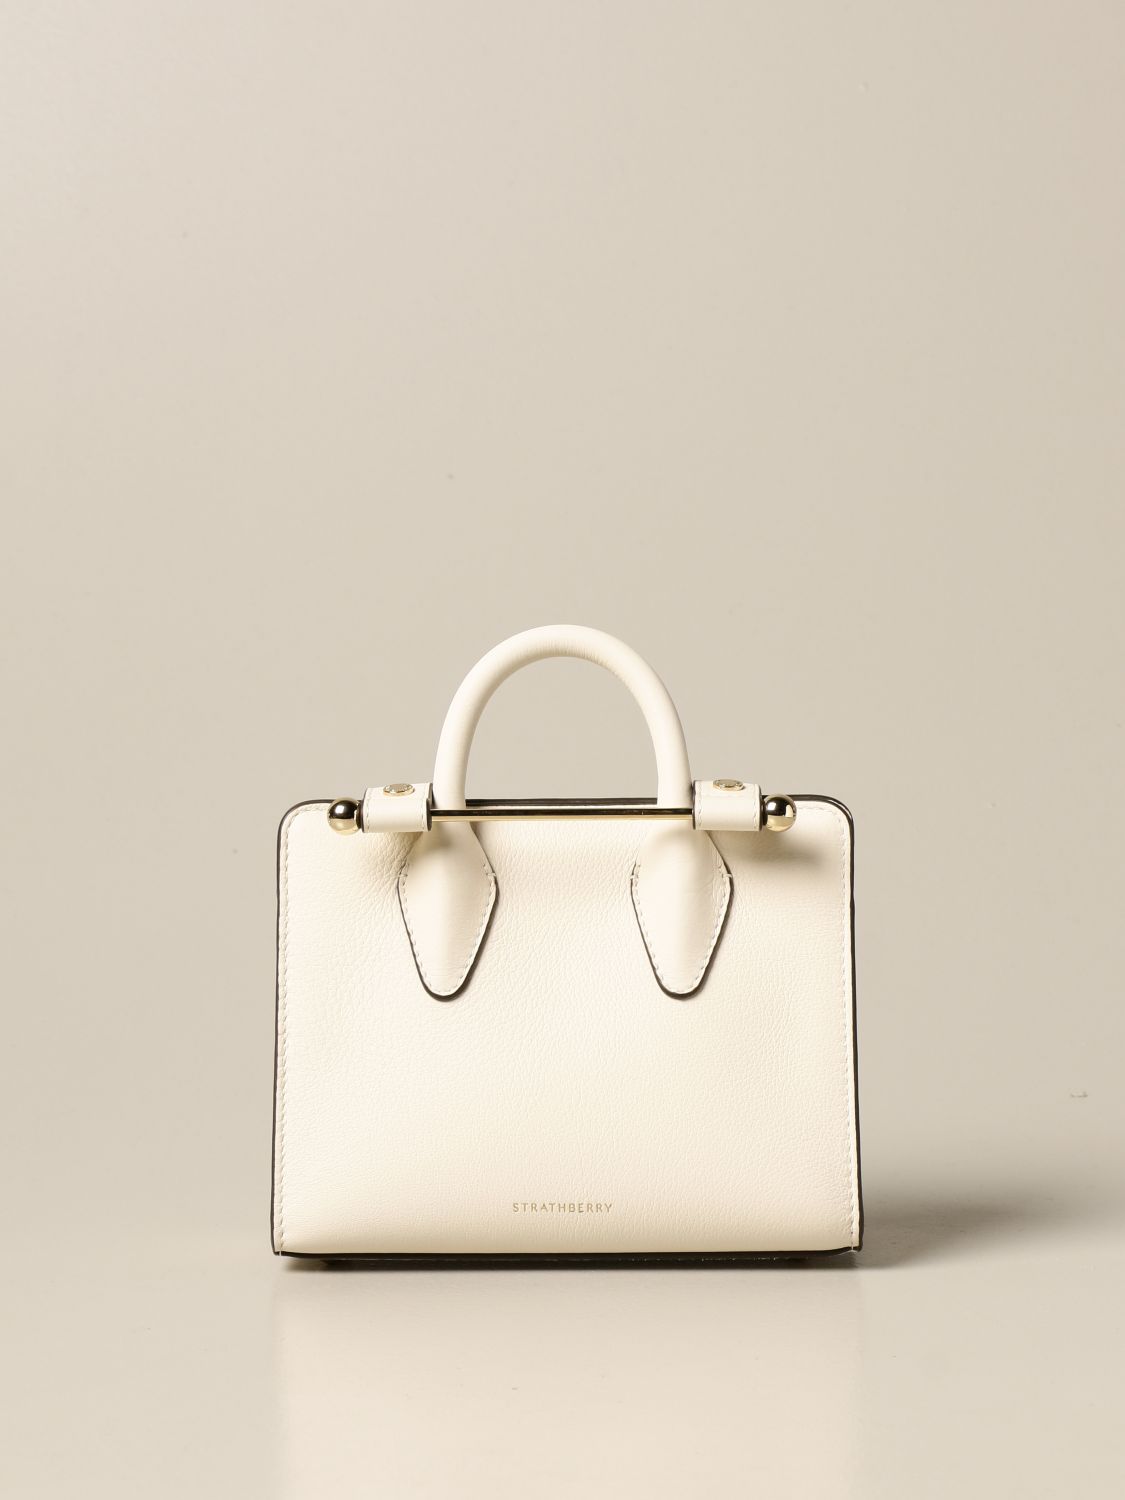 STRATHBERRY The Strathberry Nano Tote - Top Handle Leather Mini